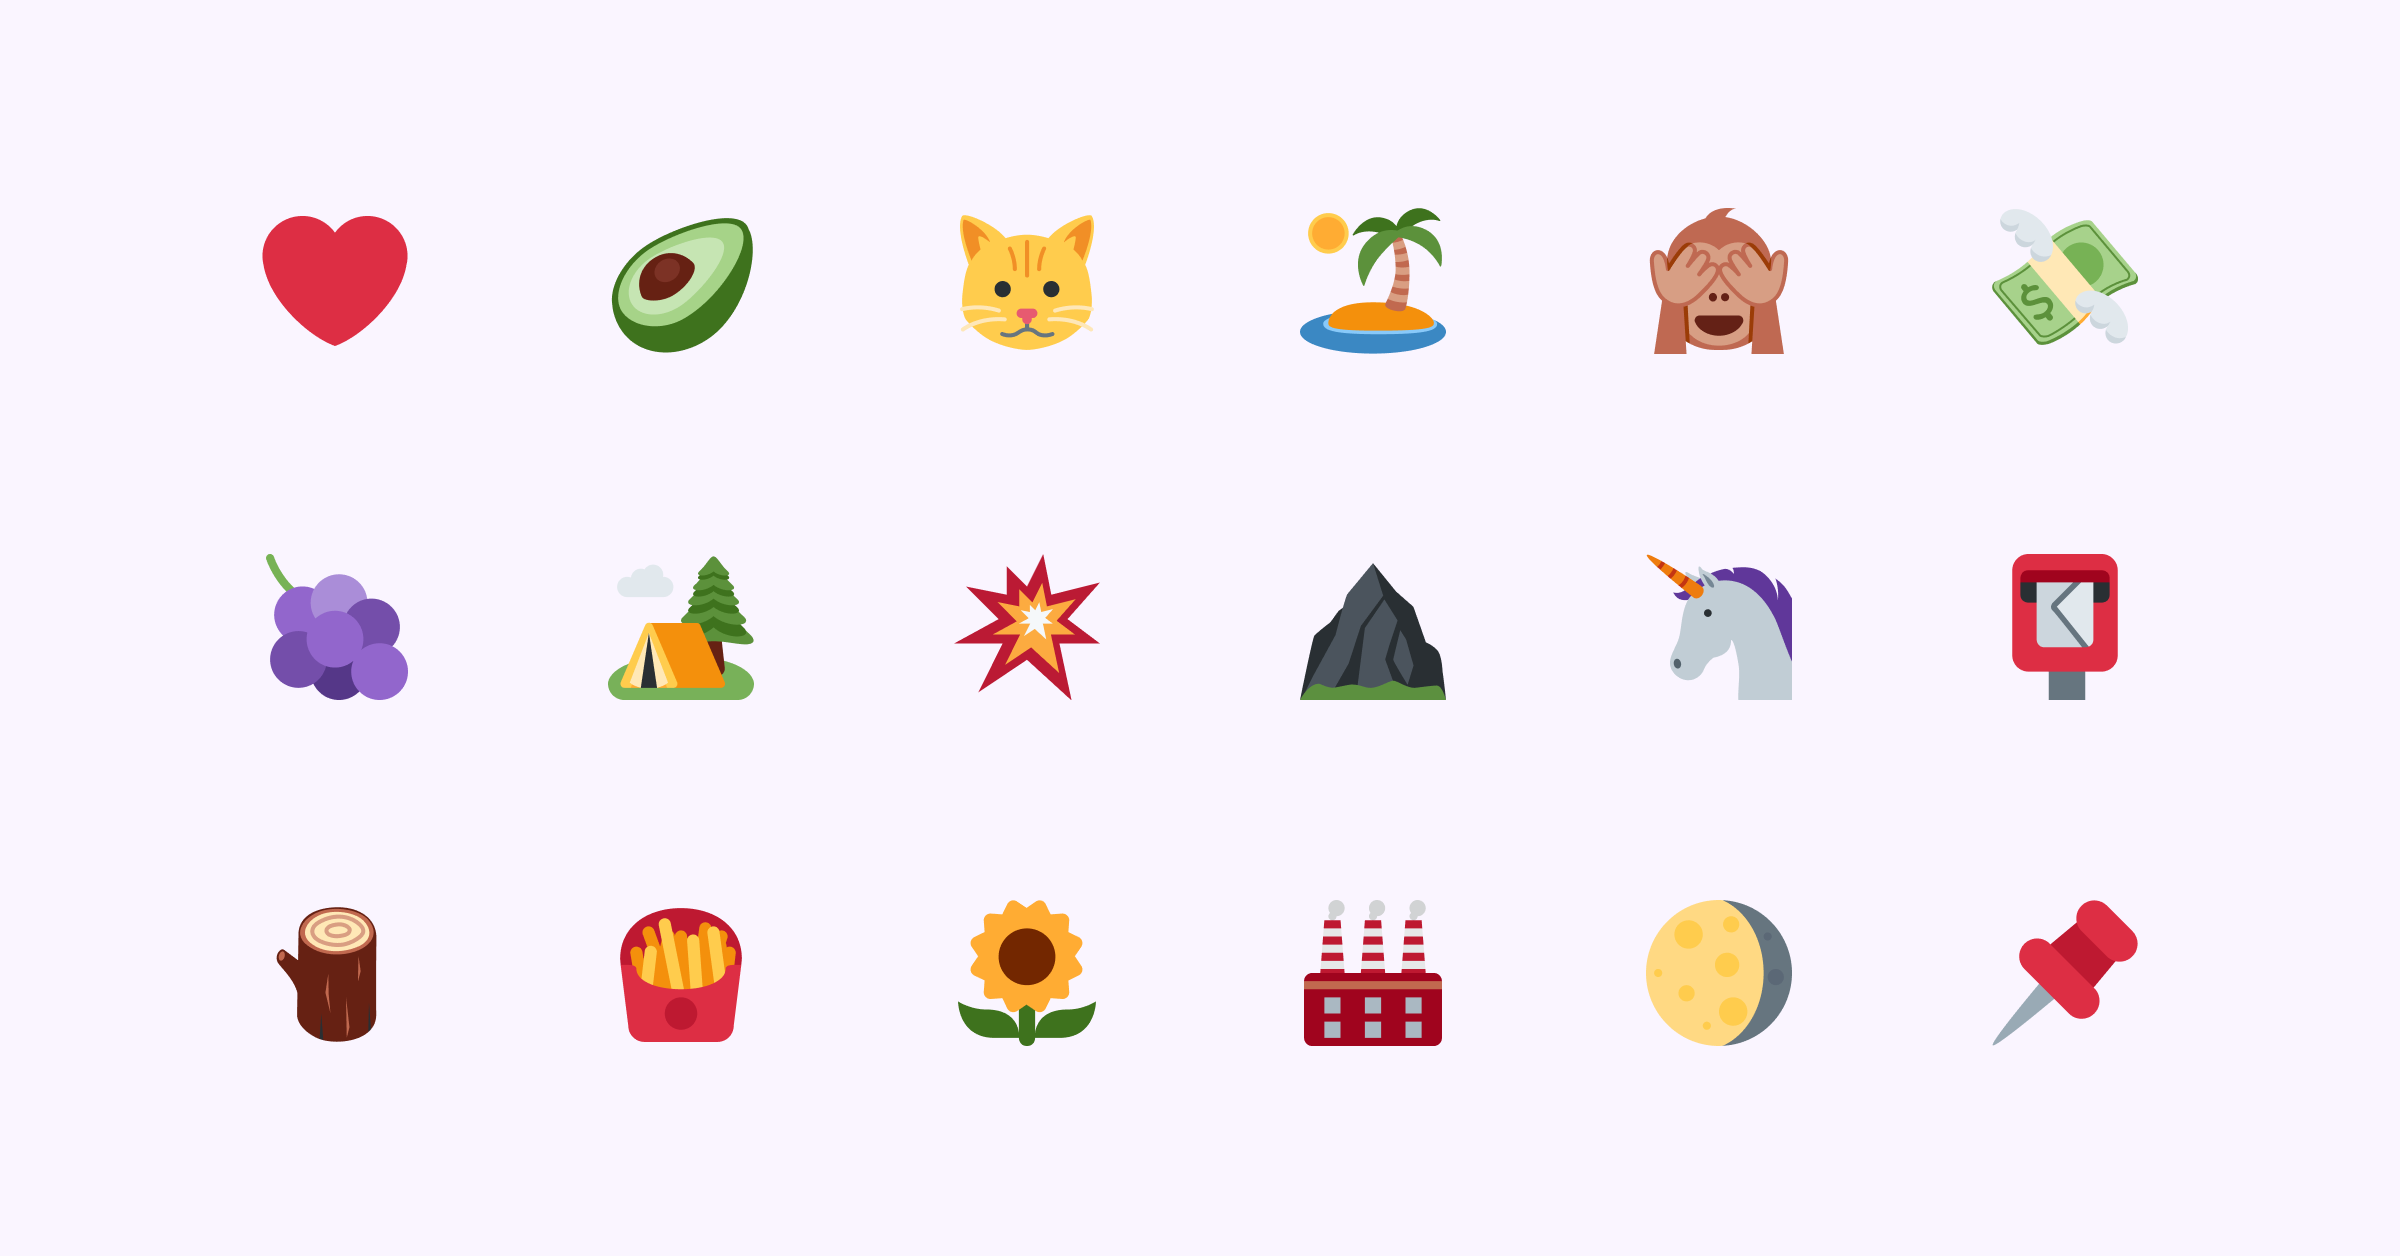 All Emojis – Emoji List for Copy and Paste